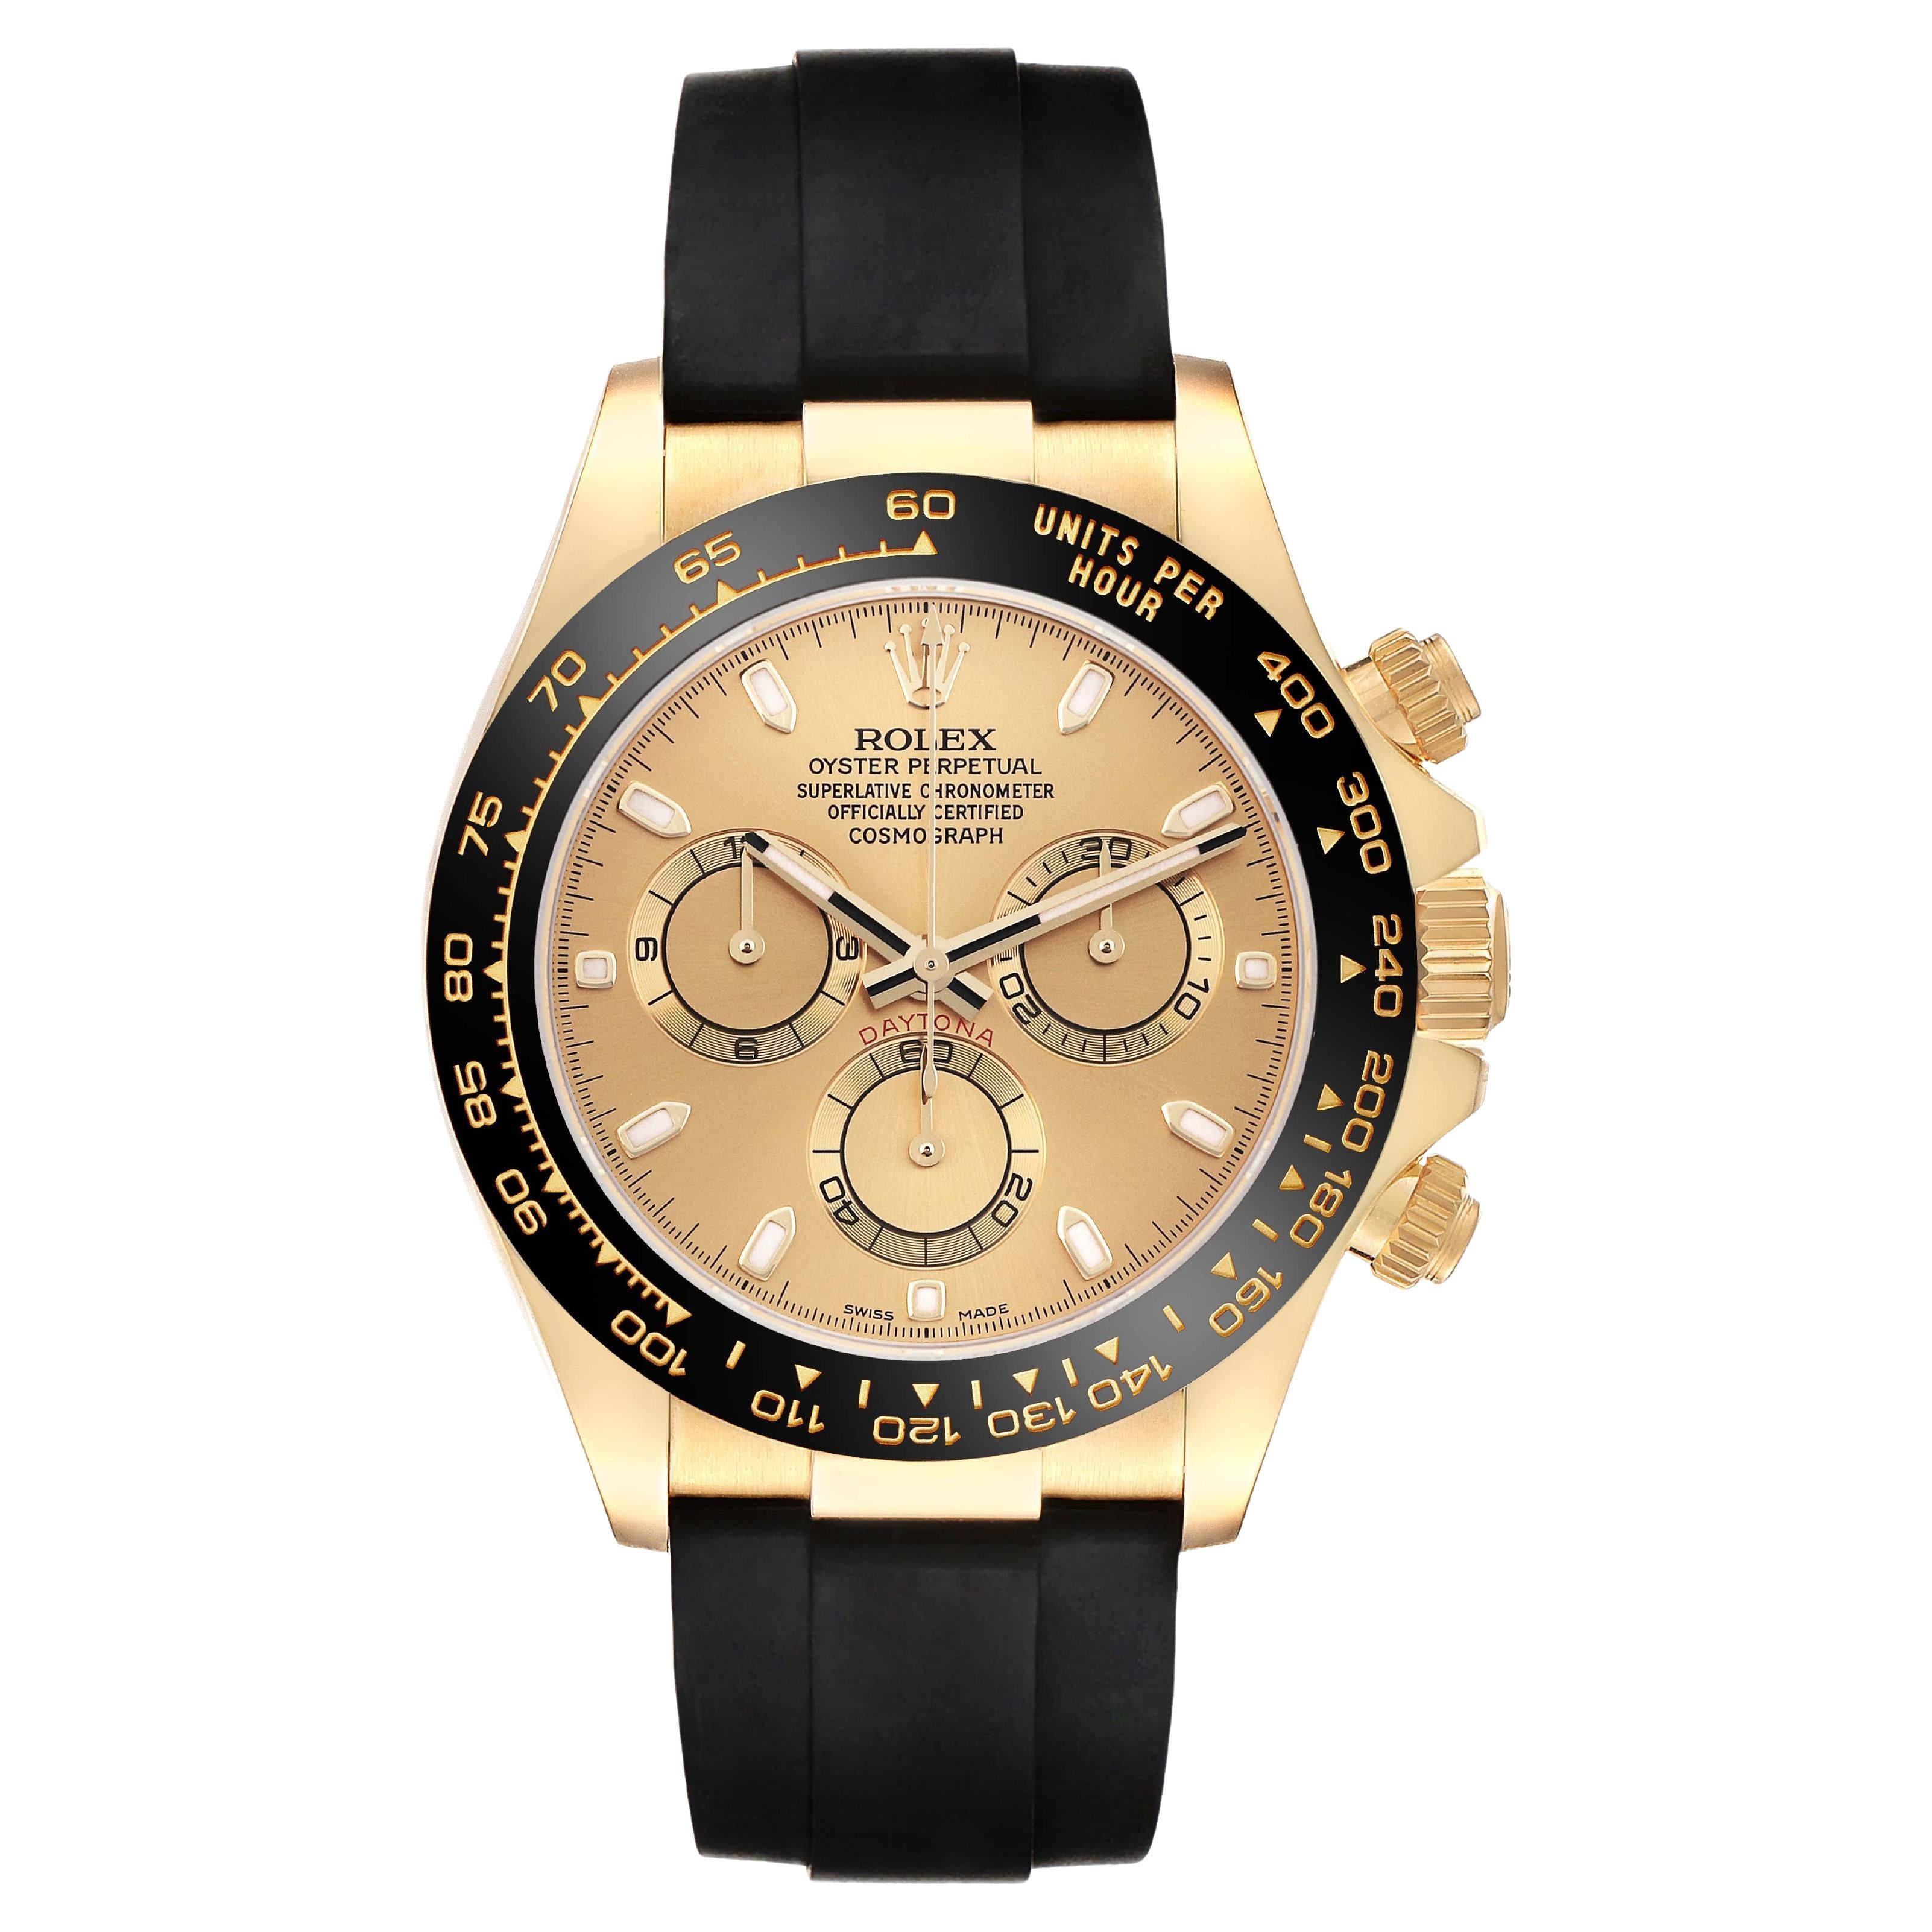 Rolex Daytona Yellow Gold Champagne Dial Mens Watch 116518 Box Card For Sale